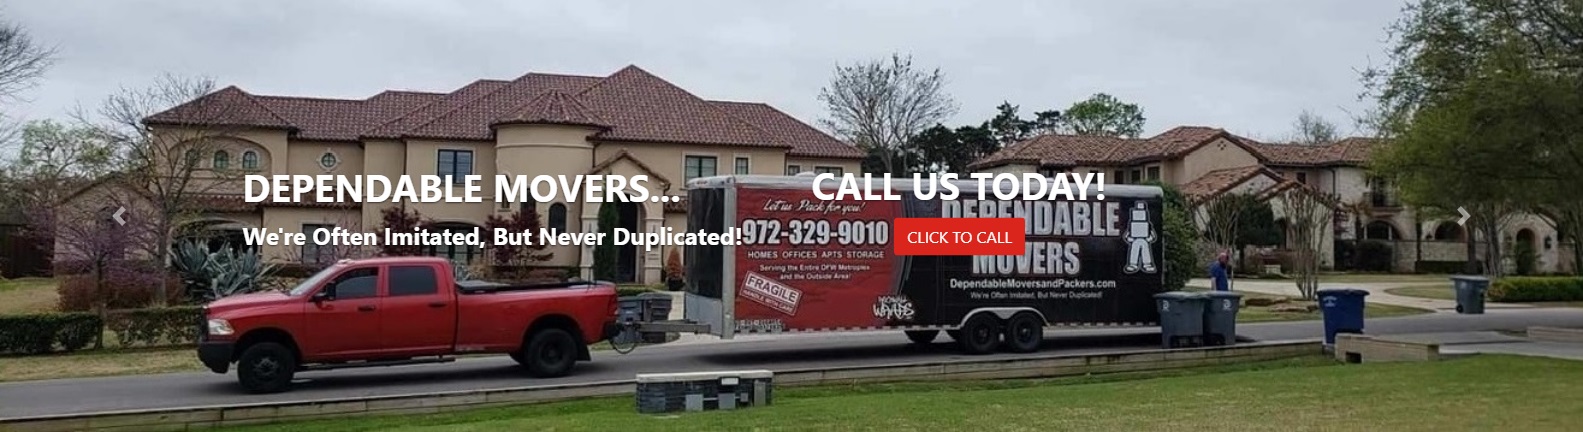 Dependable Movers McKinney Mover McKinney Moving Company - Home Office Apartment Movers Residential Commercial Movers in McKinney Texas